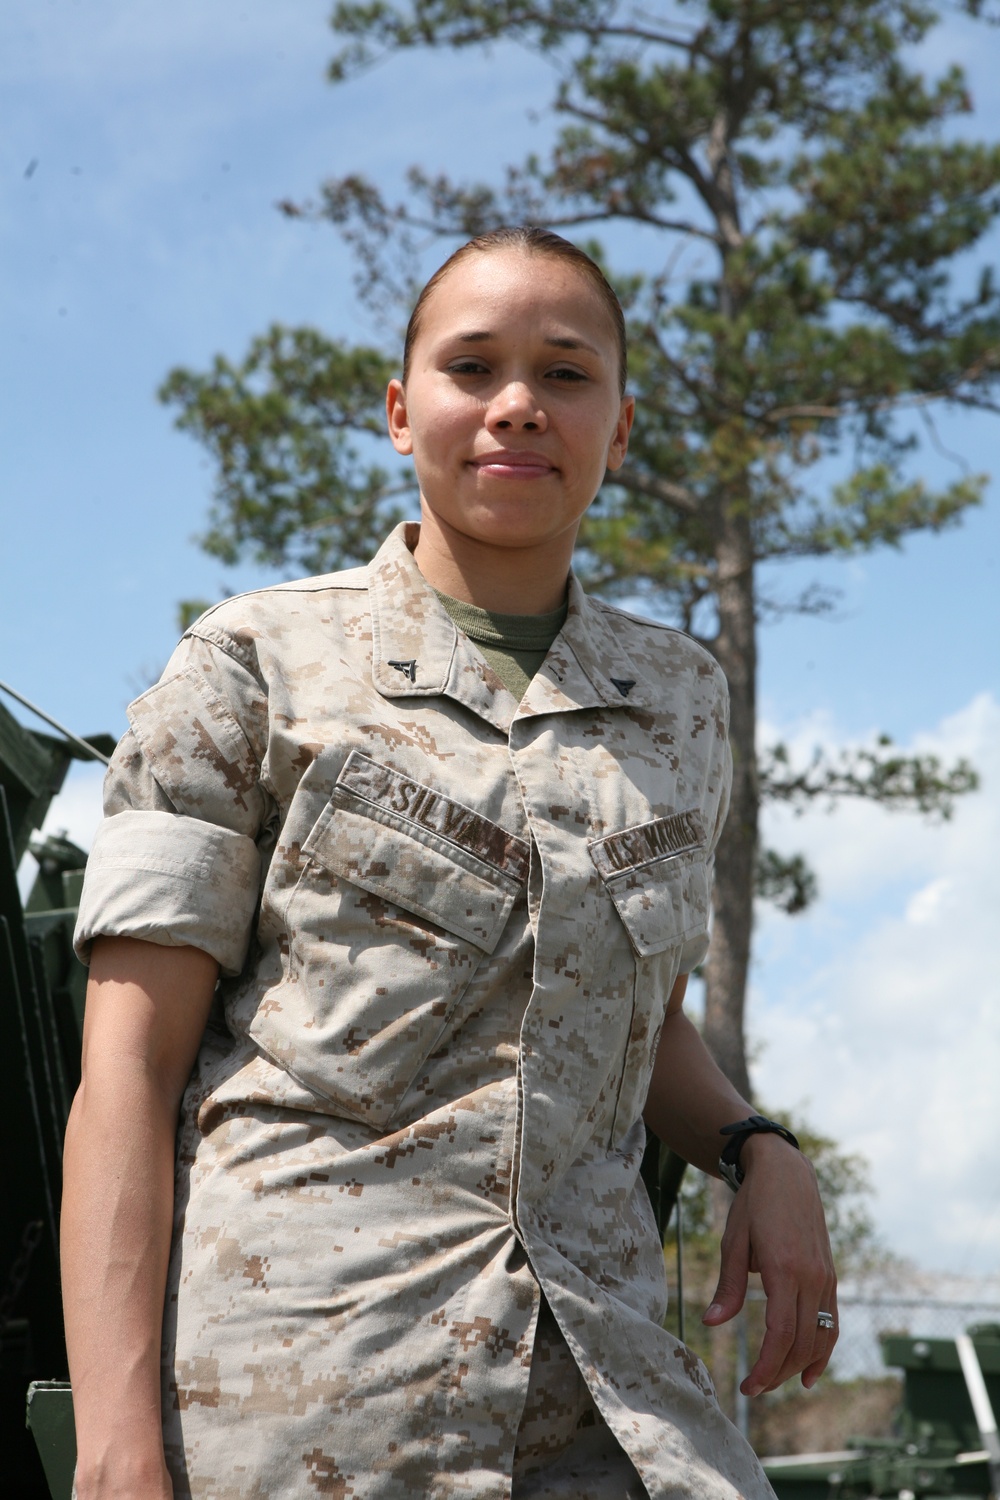 Brazil Native Shatters Myths About Female Marines